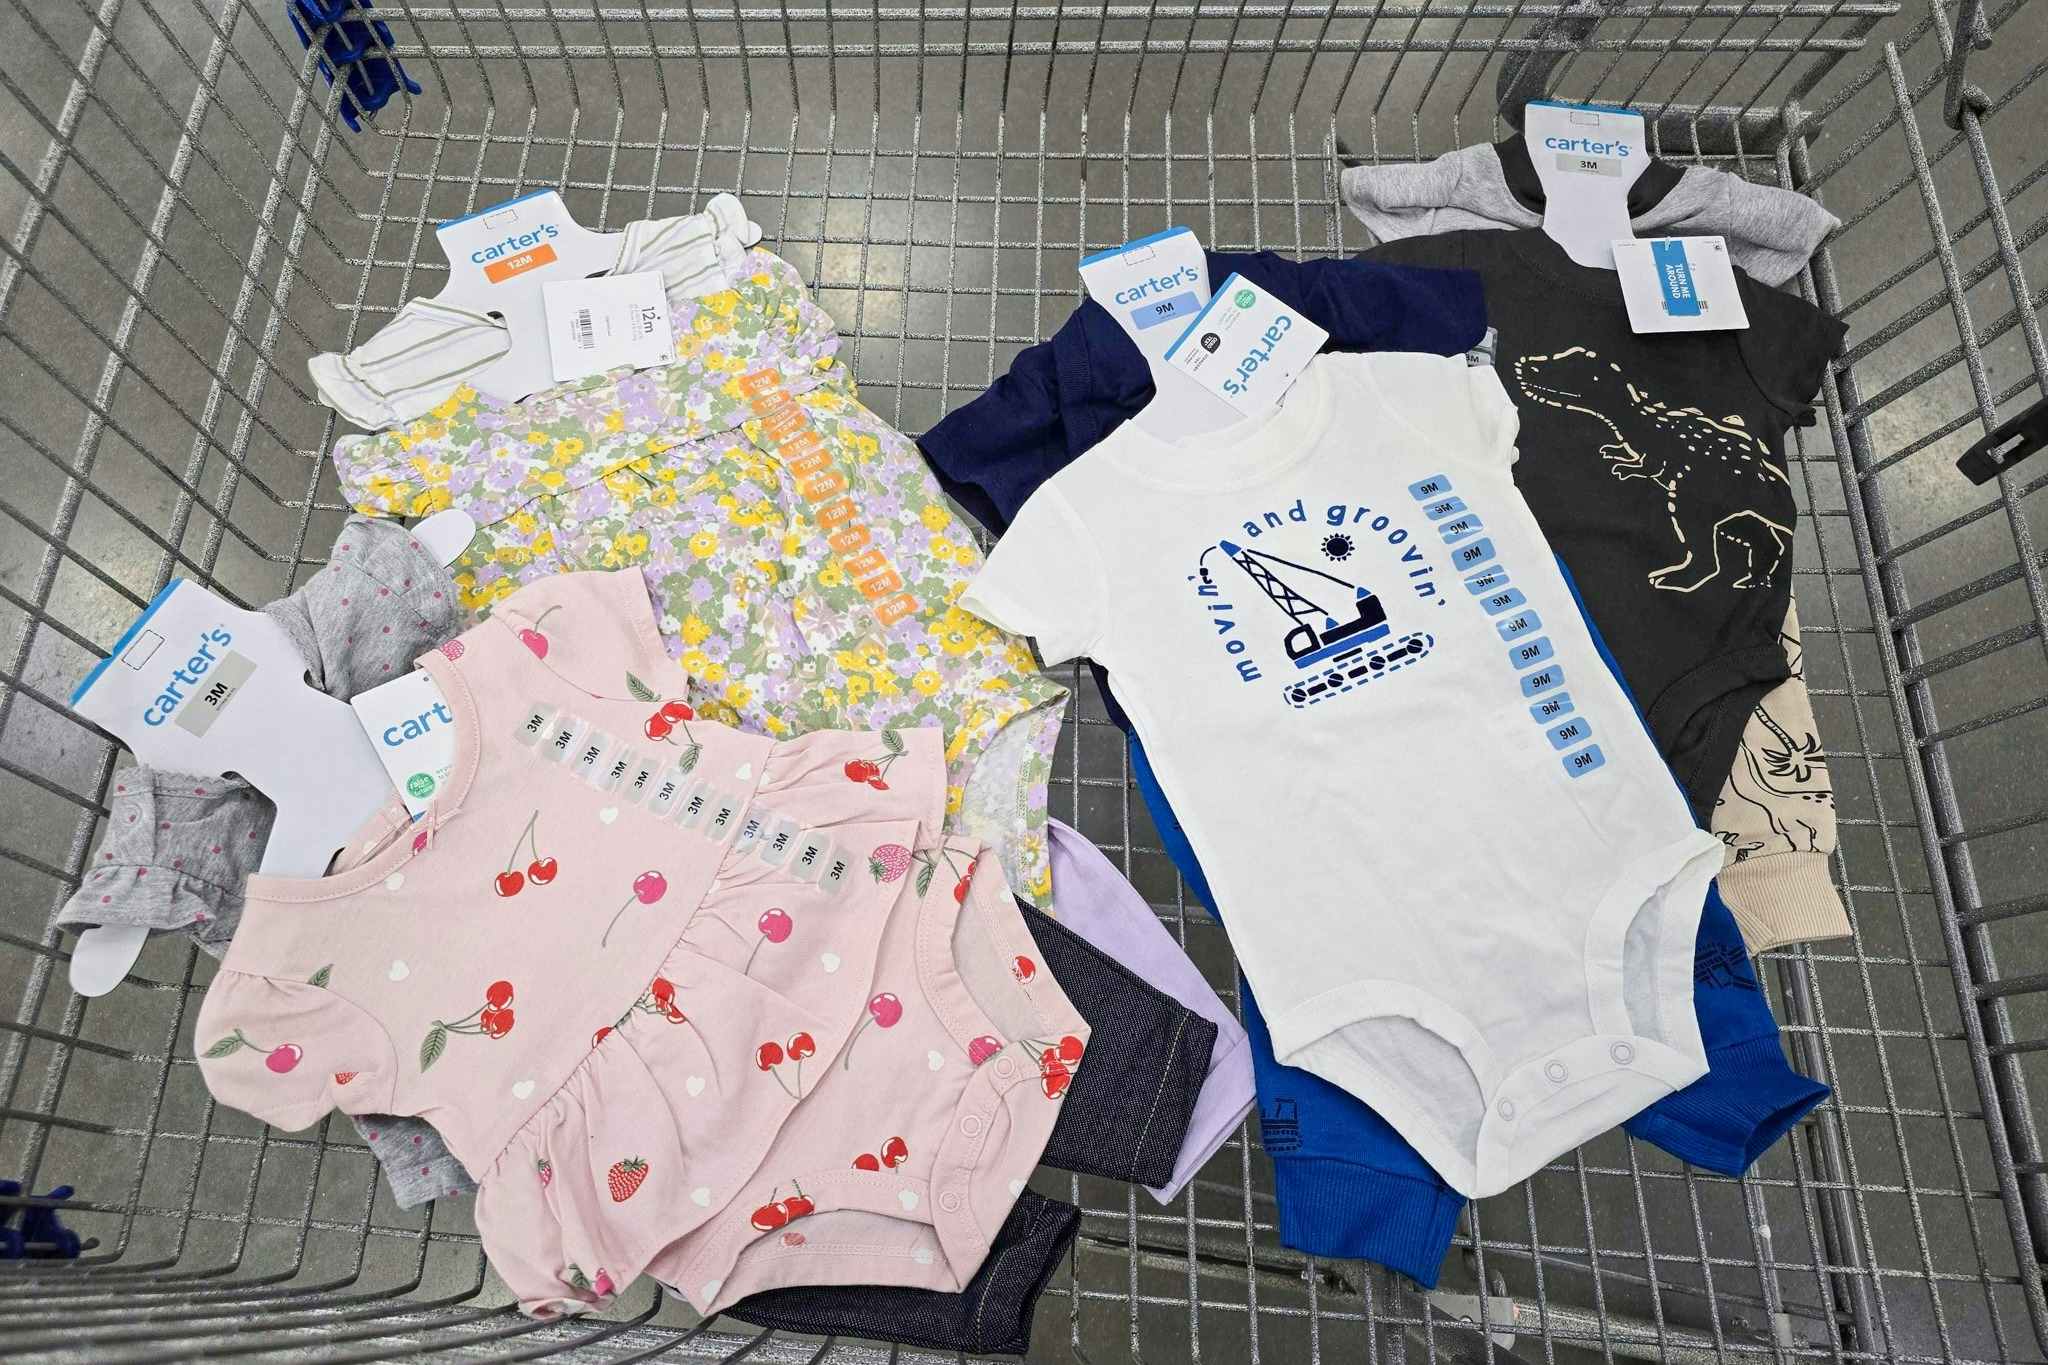 Carter's 3-Piece Outfit Sets, Just $8.98 at Sam's Club